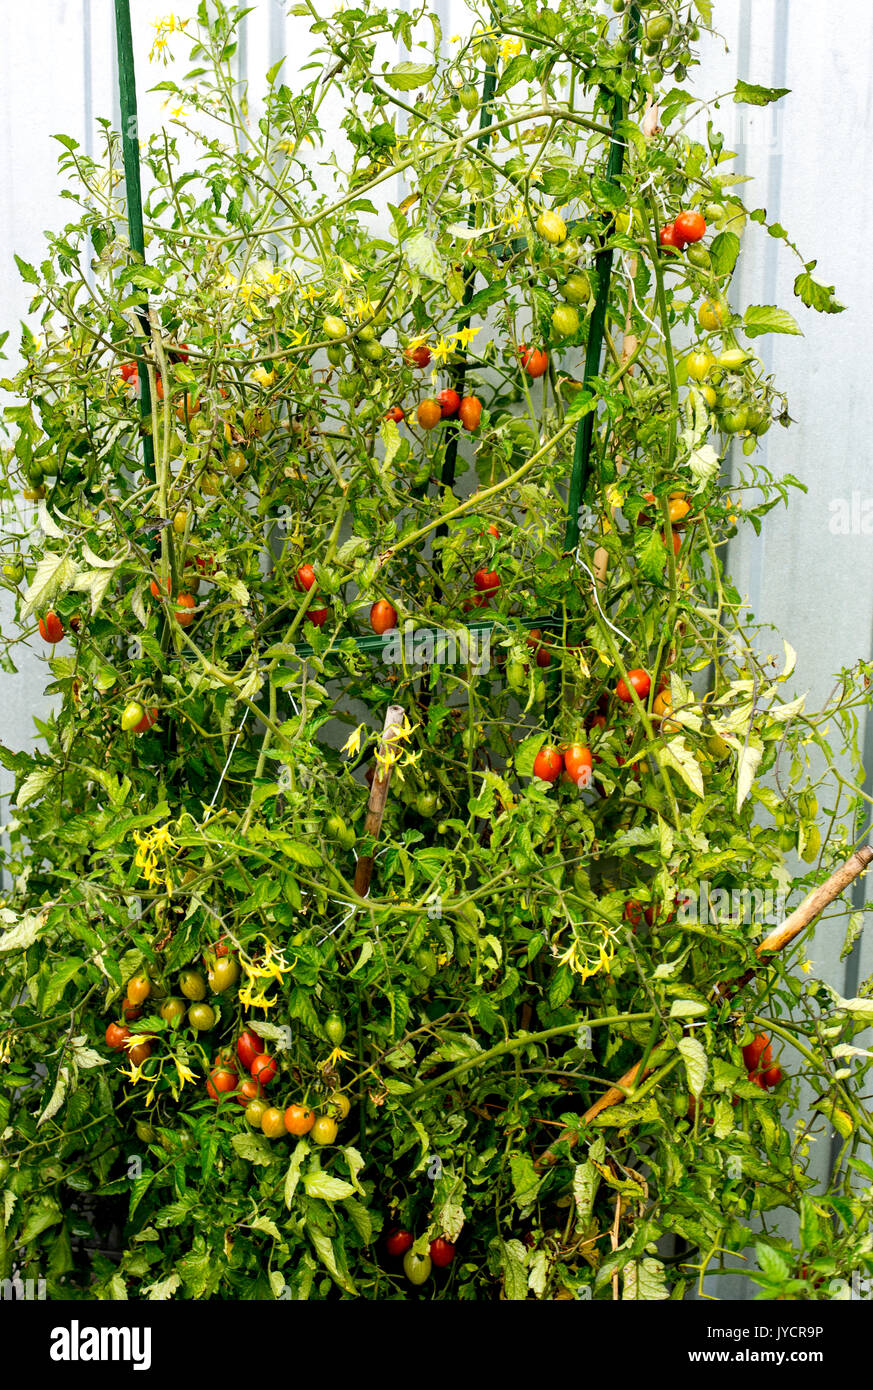 Plant of cherry tomatoes (Solanum lycopersicum var. cerasiforme) growing in a pot and showing plenty od green, yellow and red cherry like tomatoes. Stock Photo